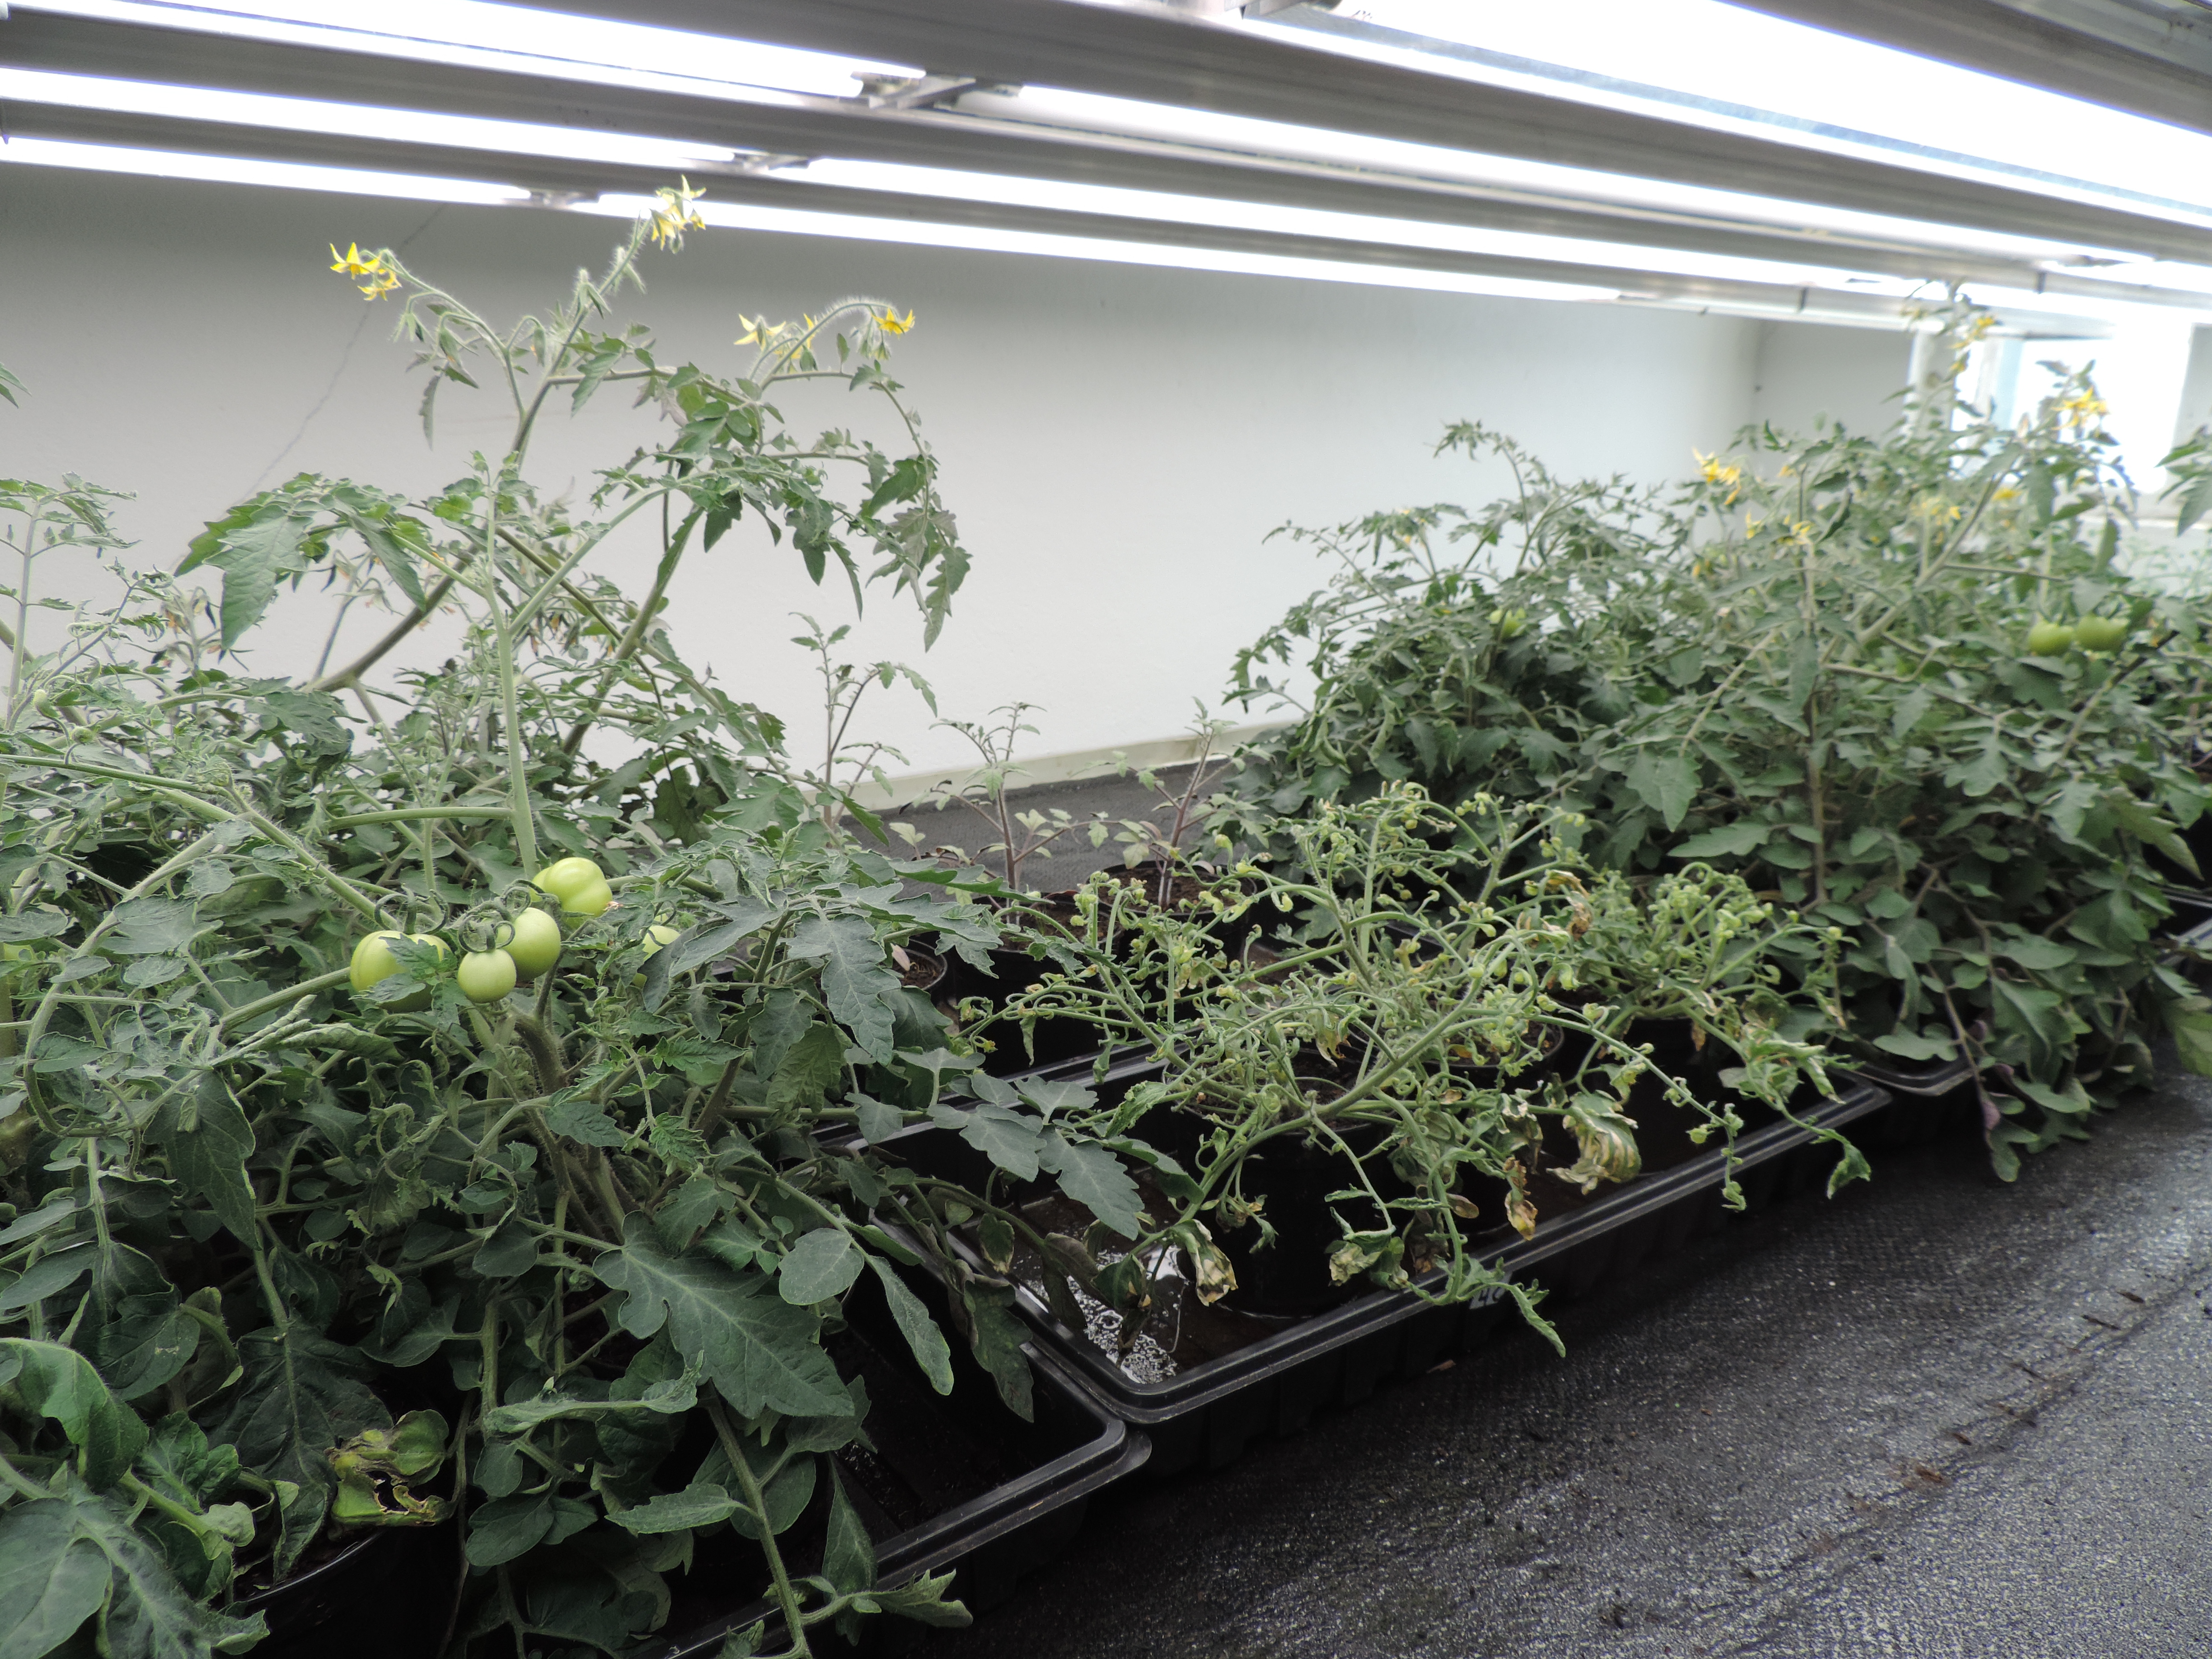 The tomato plants in the middle tray were severely stunted after application of a fertiliser containing clopyralid. (Photo: Kirsty McKinnon)